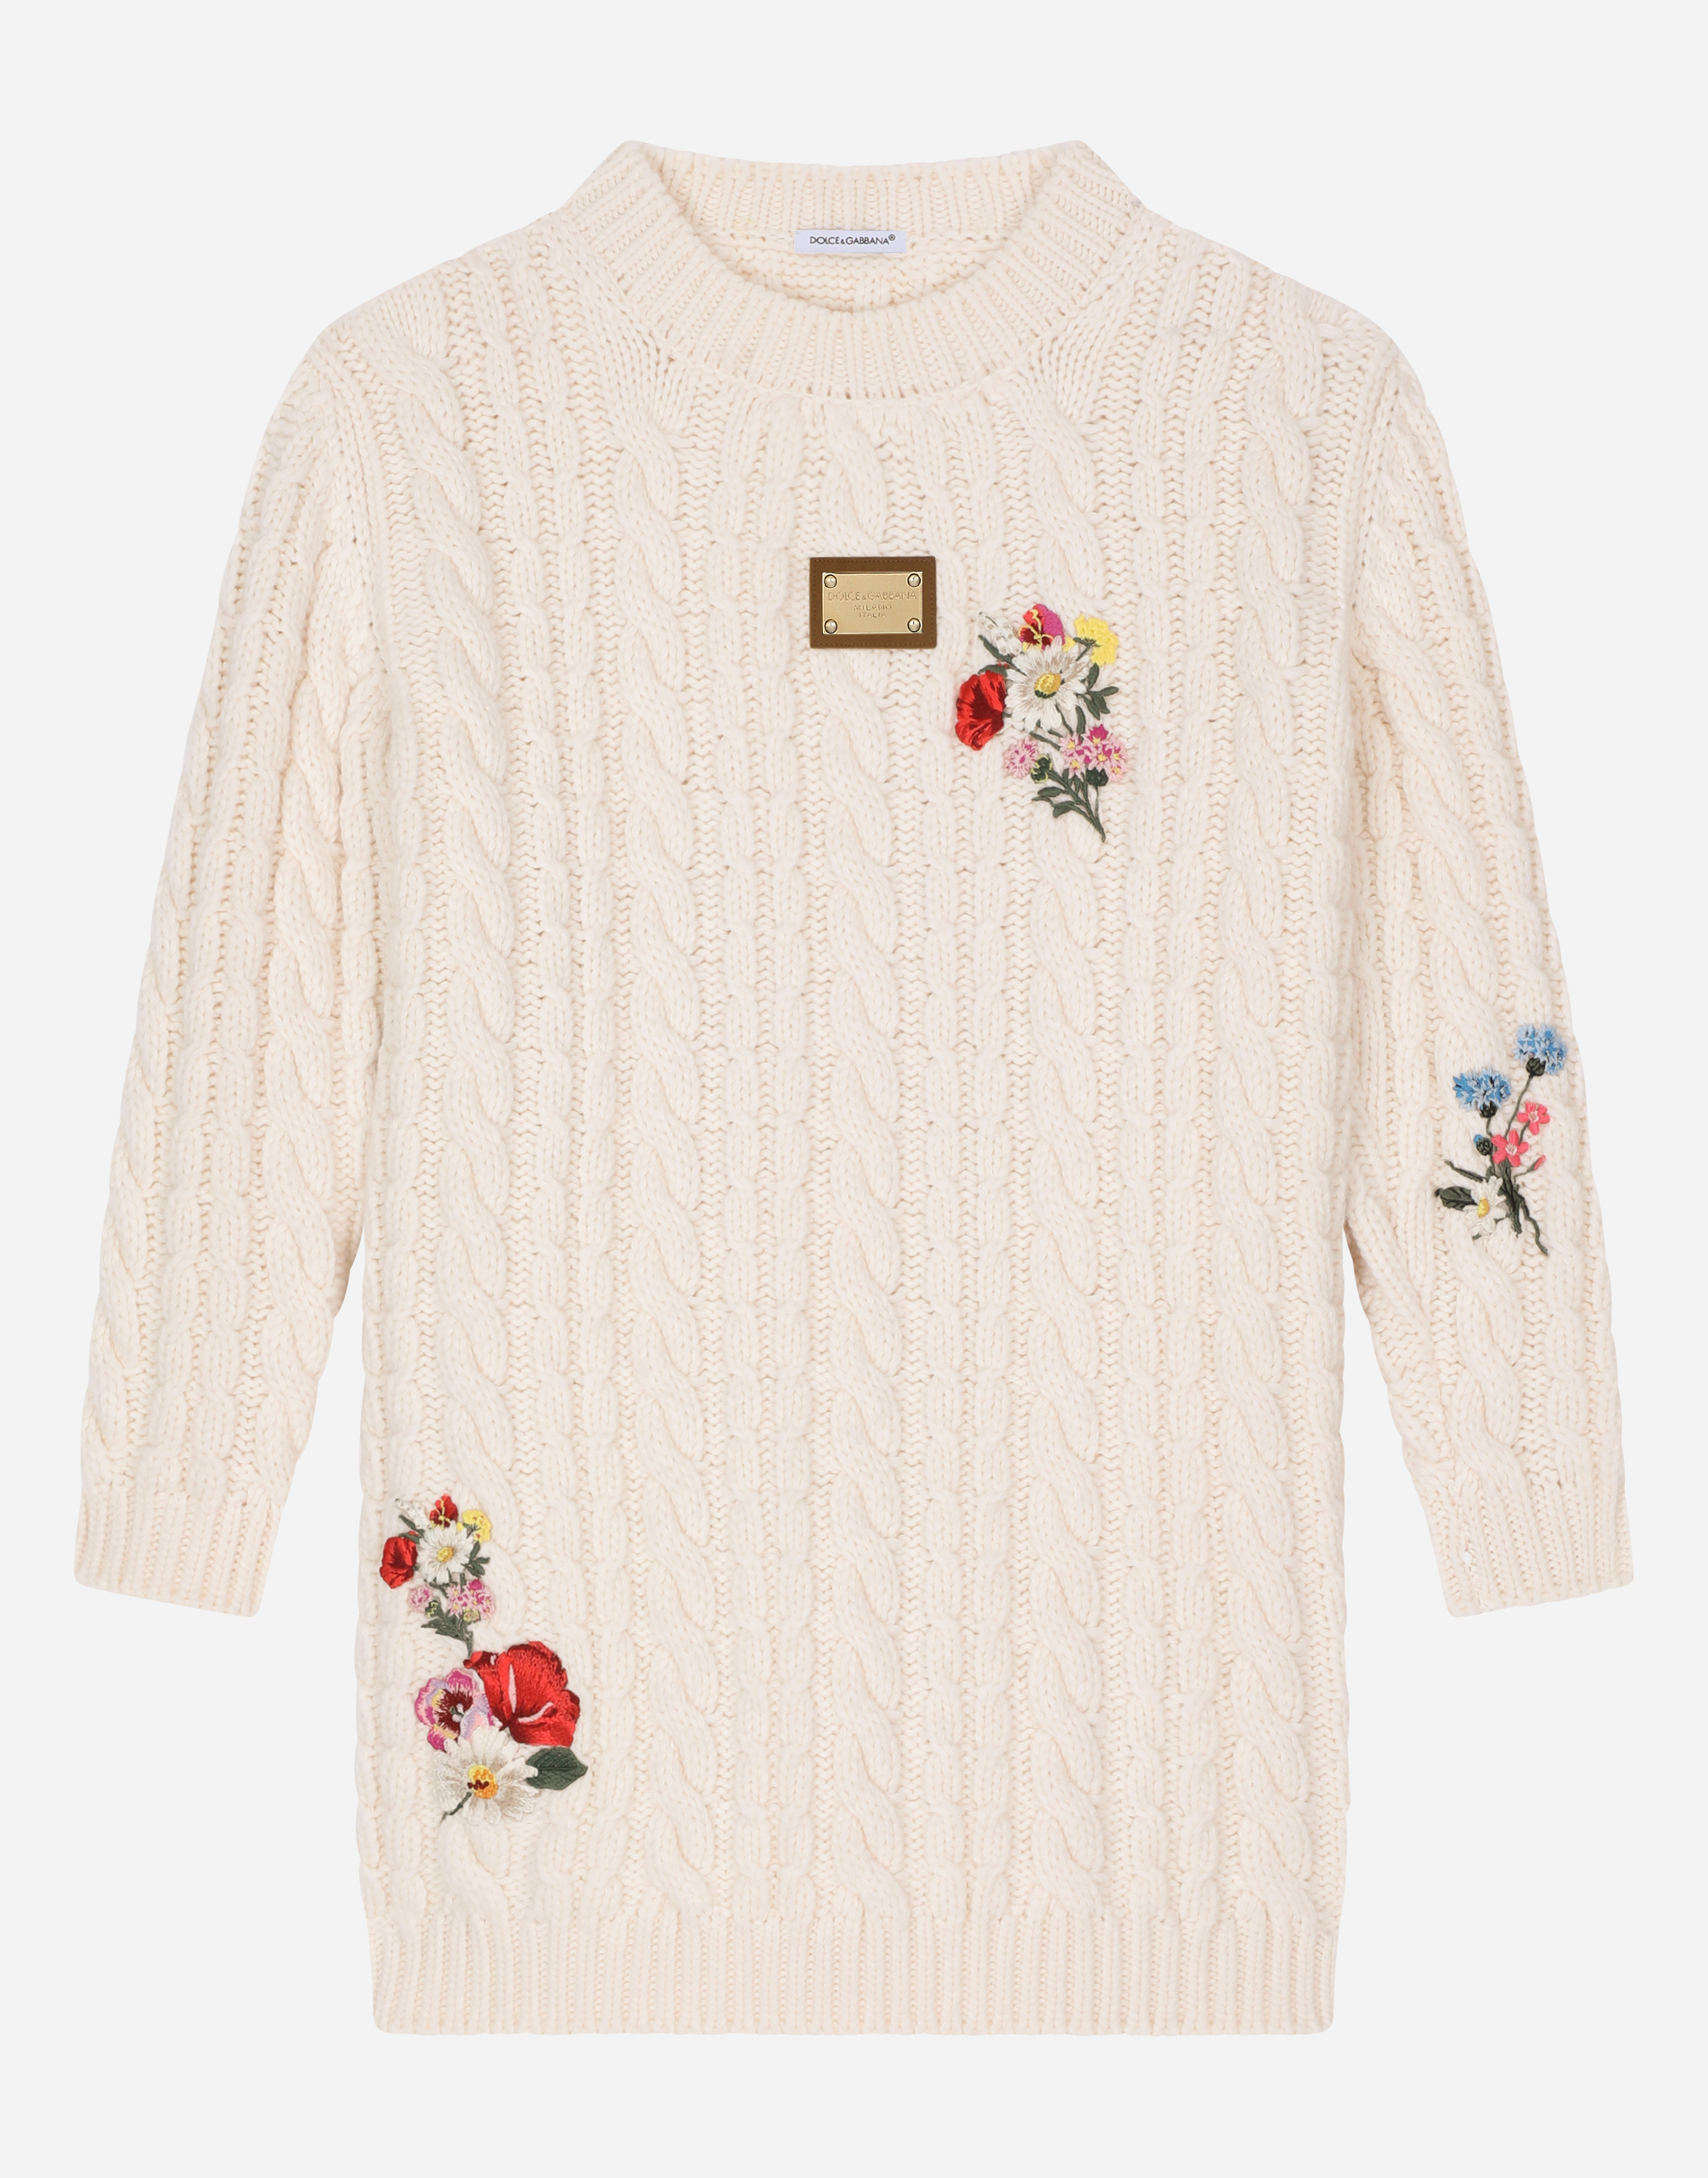 Dolce & Gabbana Knit Dress With Floral Embroidery In ホワイト